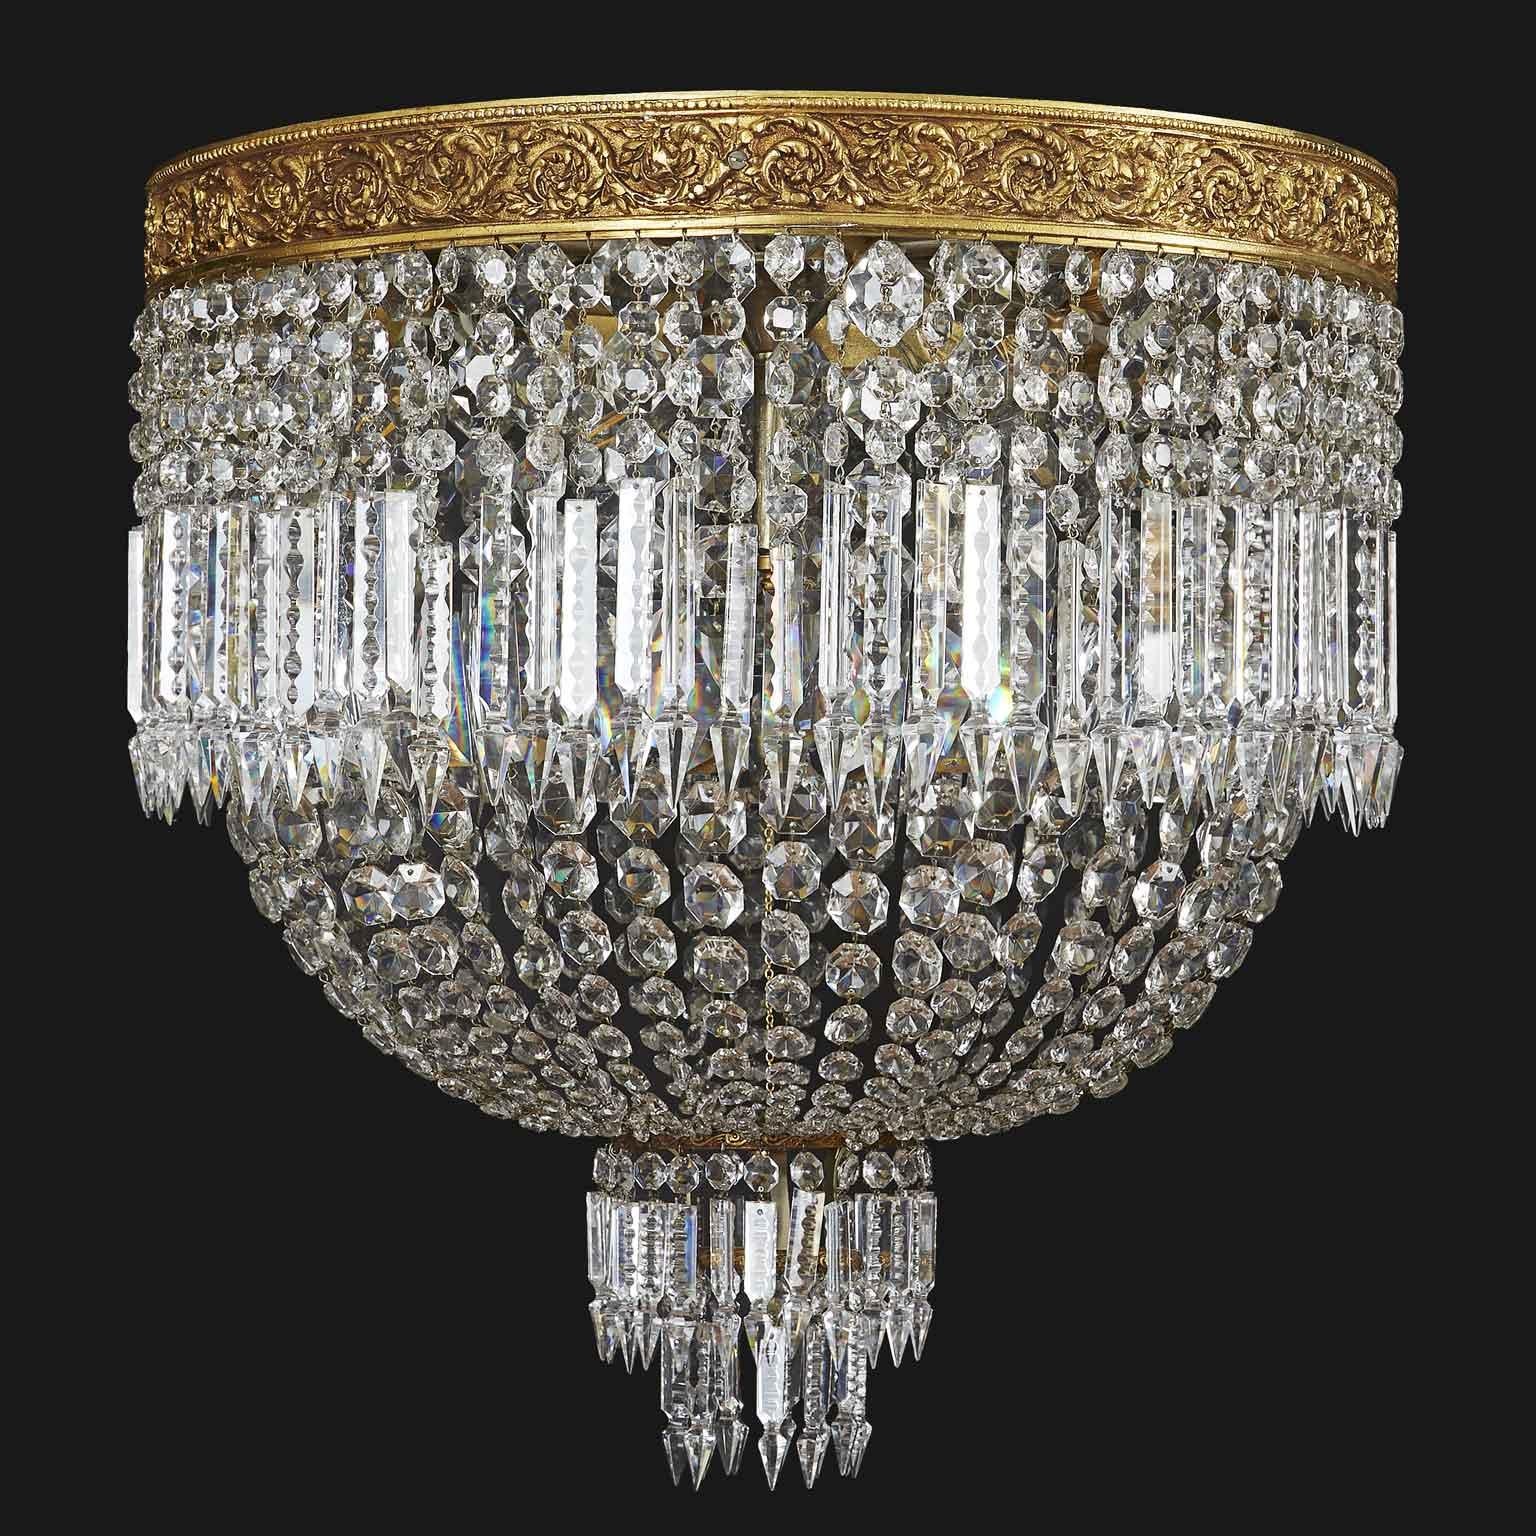 Neoclassical Large Italian Crystal Ceiling Fixture Round Flush Mount circa 1955